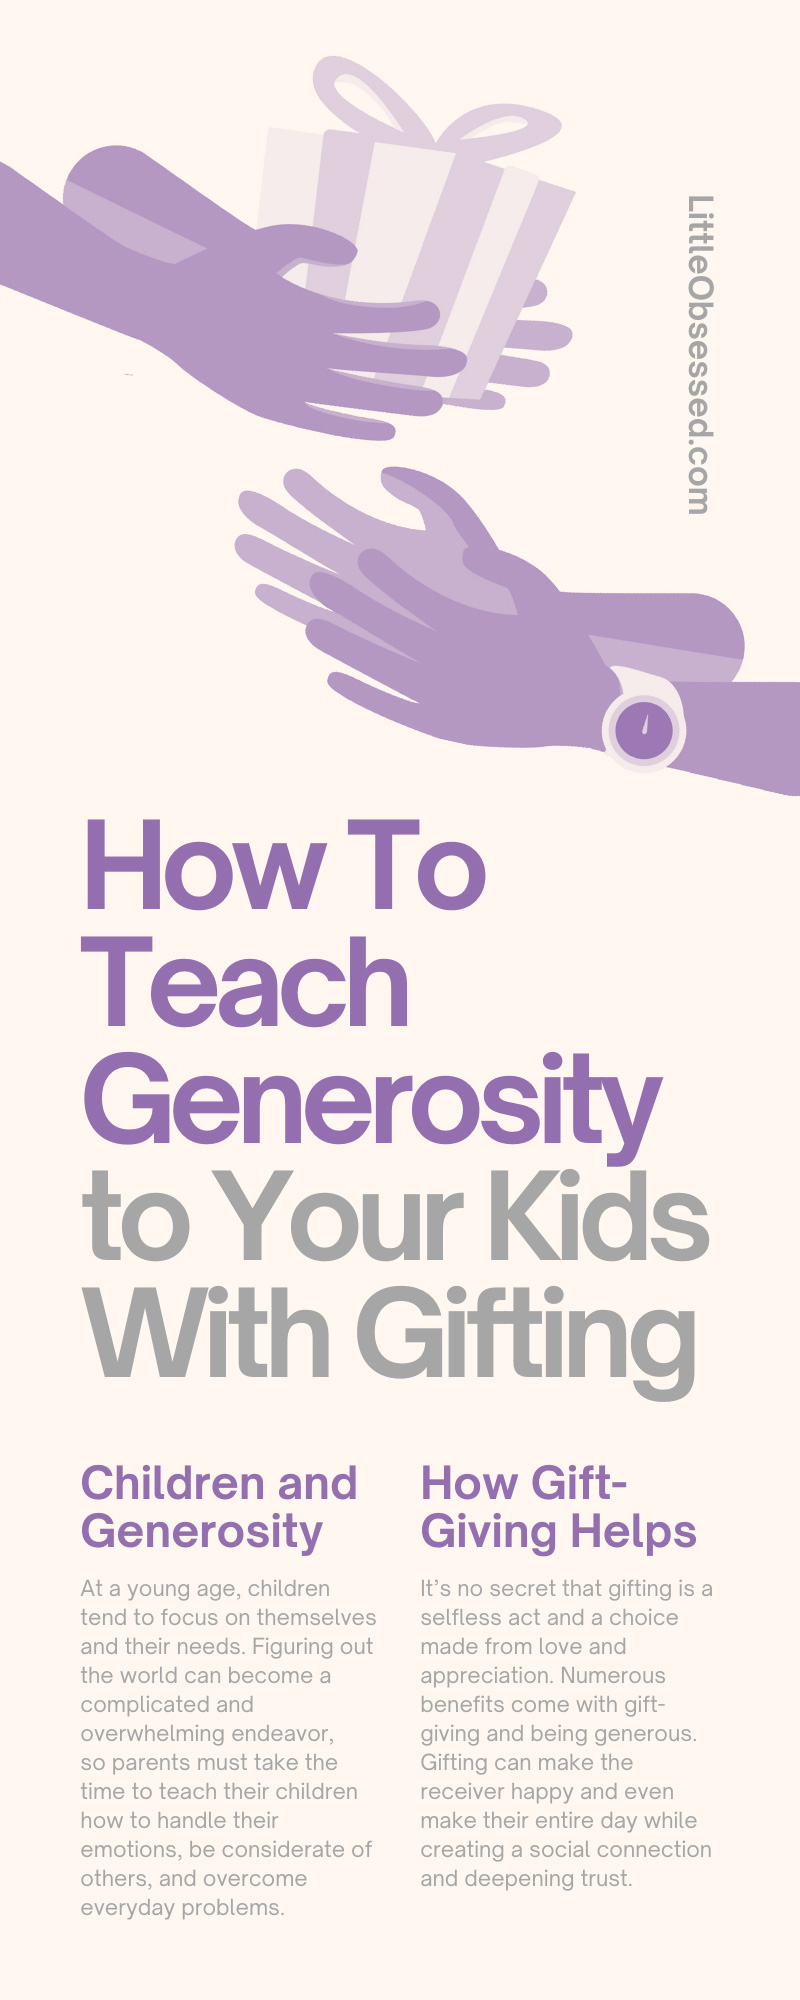 How To Teach Generosity to Your Kids With Gifting